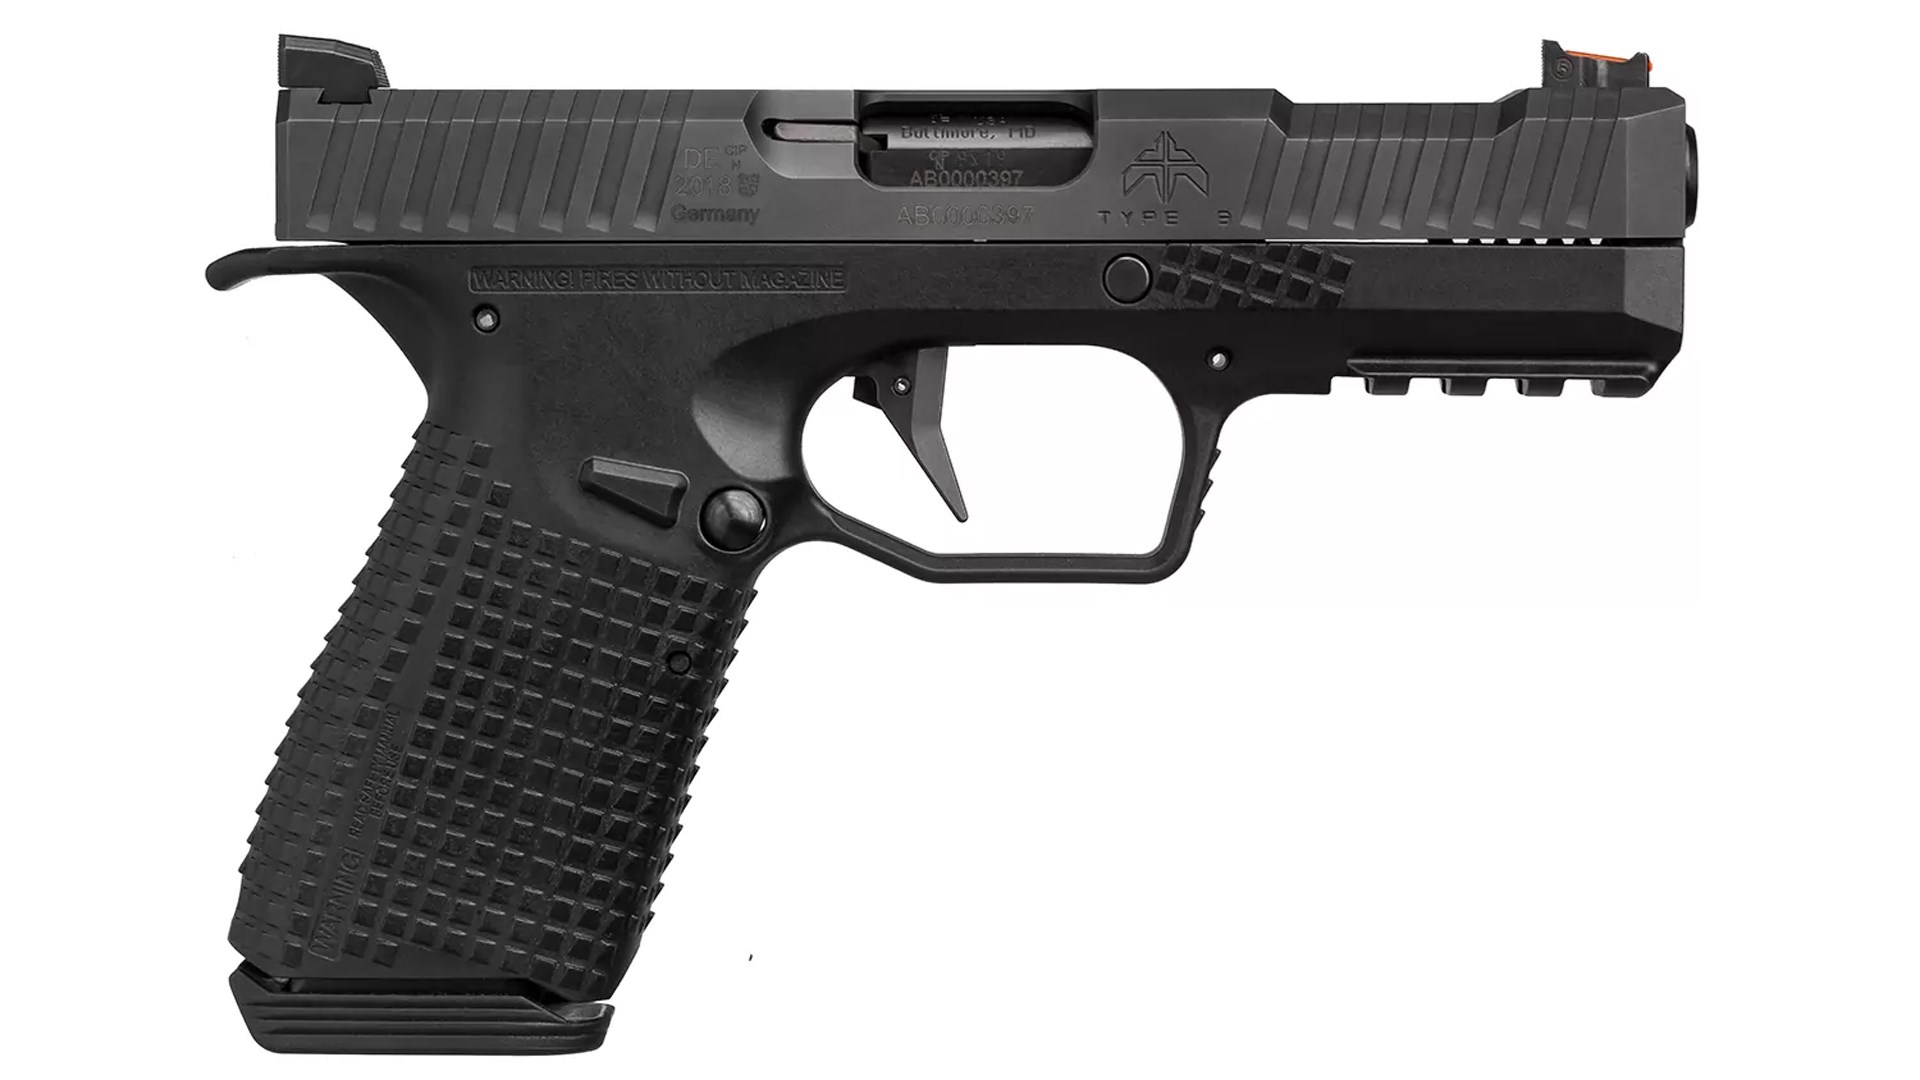 Right side of the Archon Firearms Type B pistol.